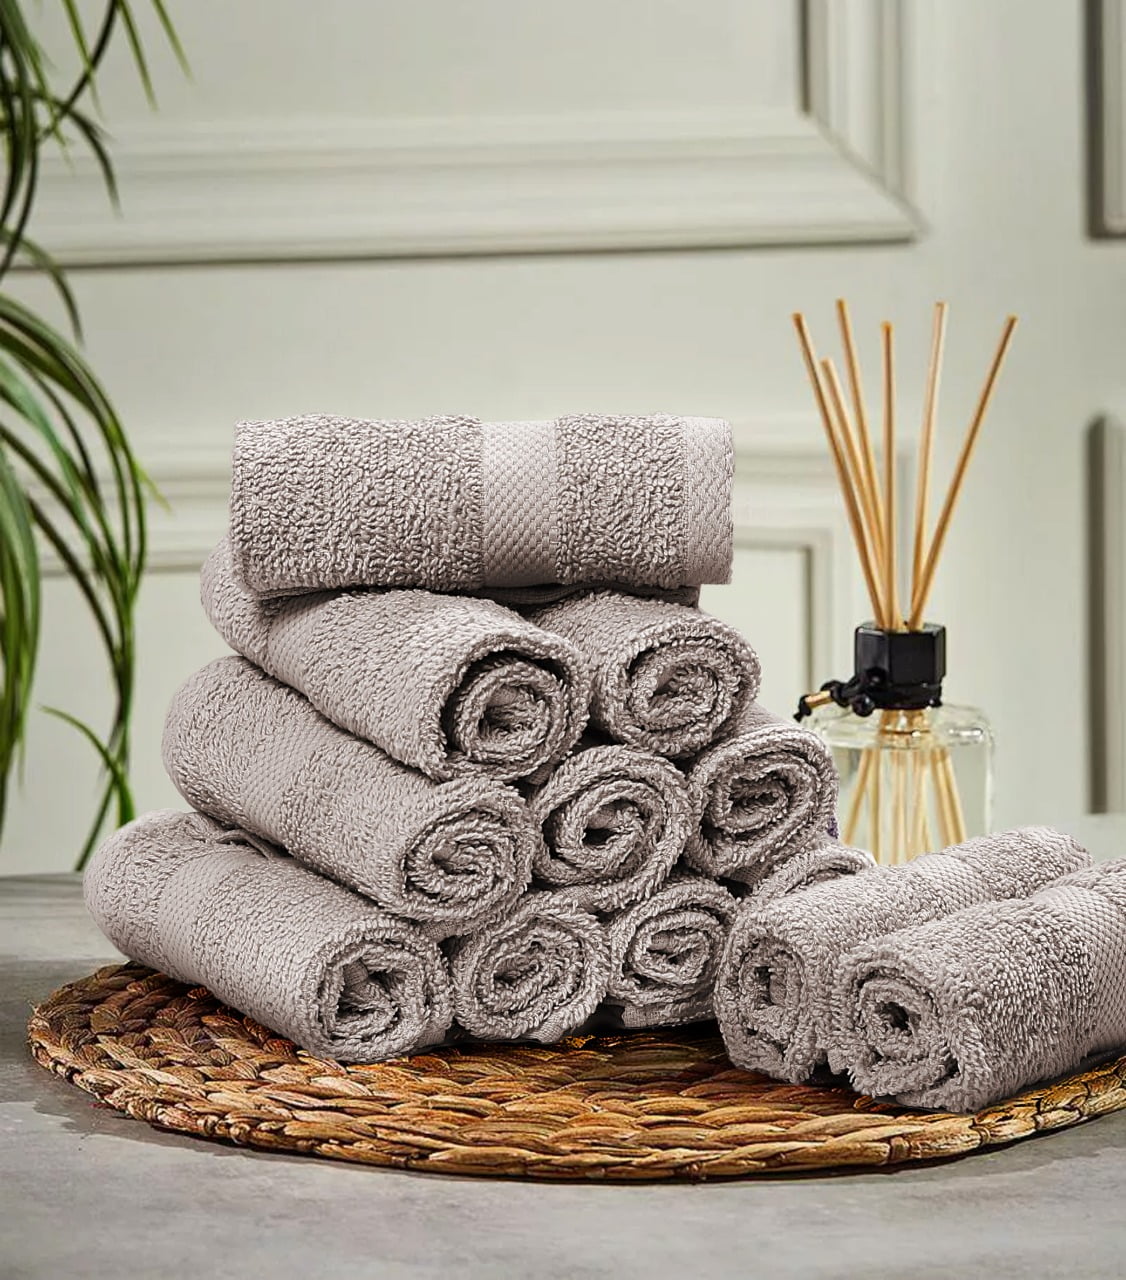 Bath Towels 22 x 44 inches, Set of 6 Ultra Soft 100% Combed Cotton